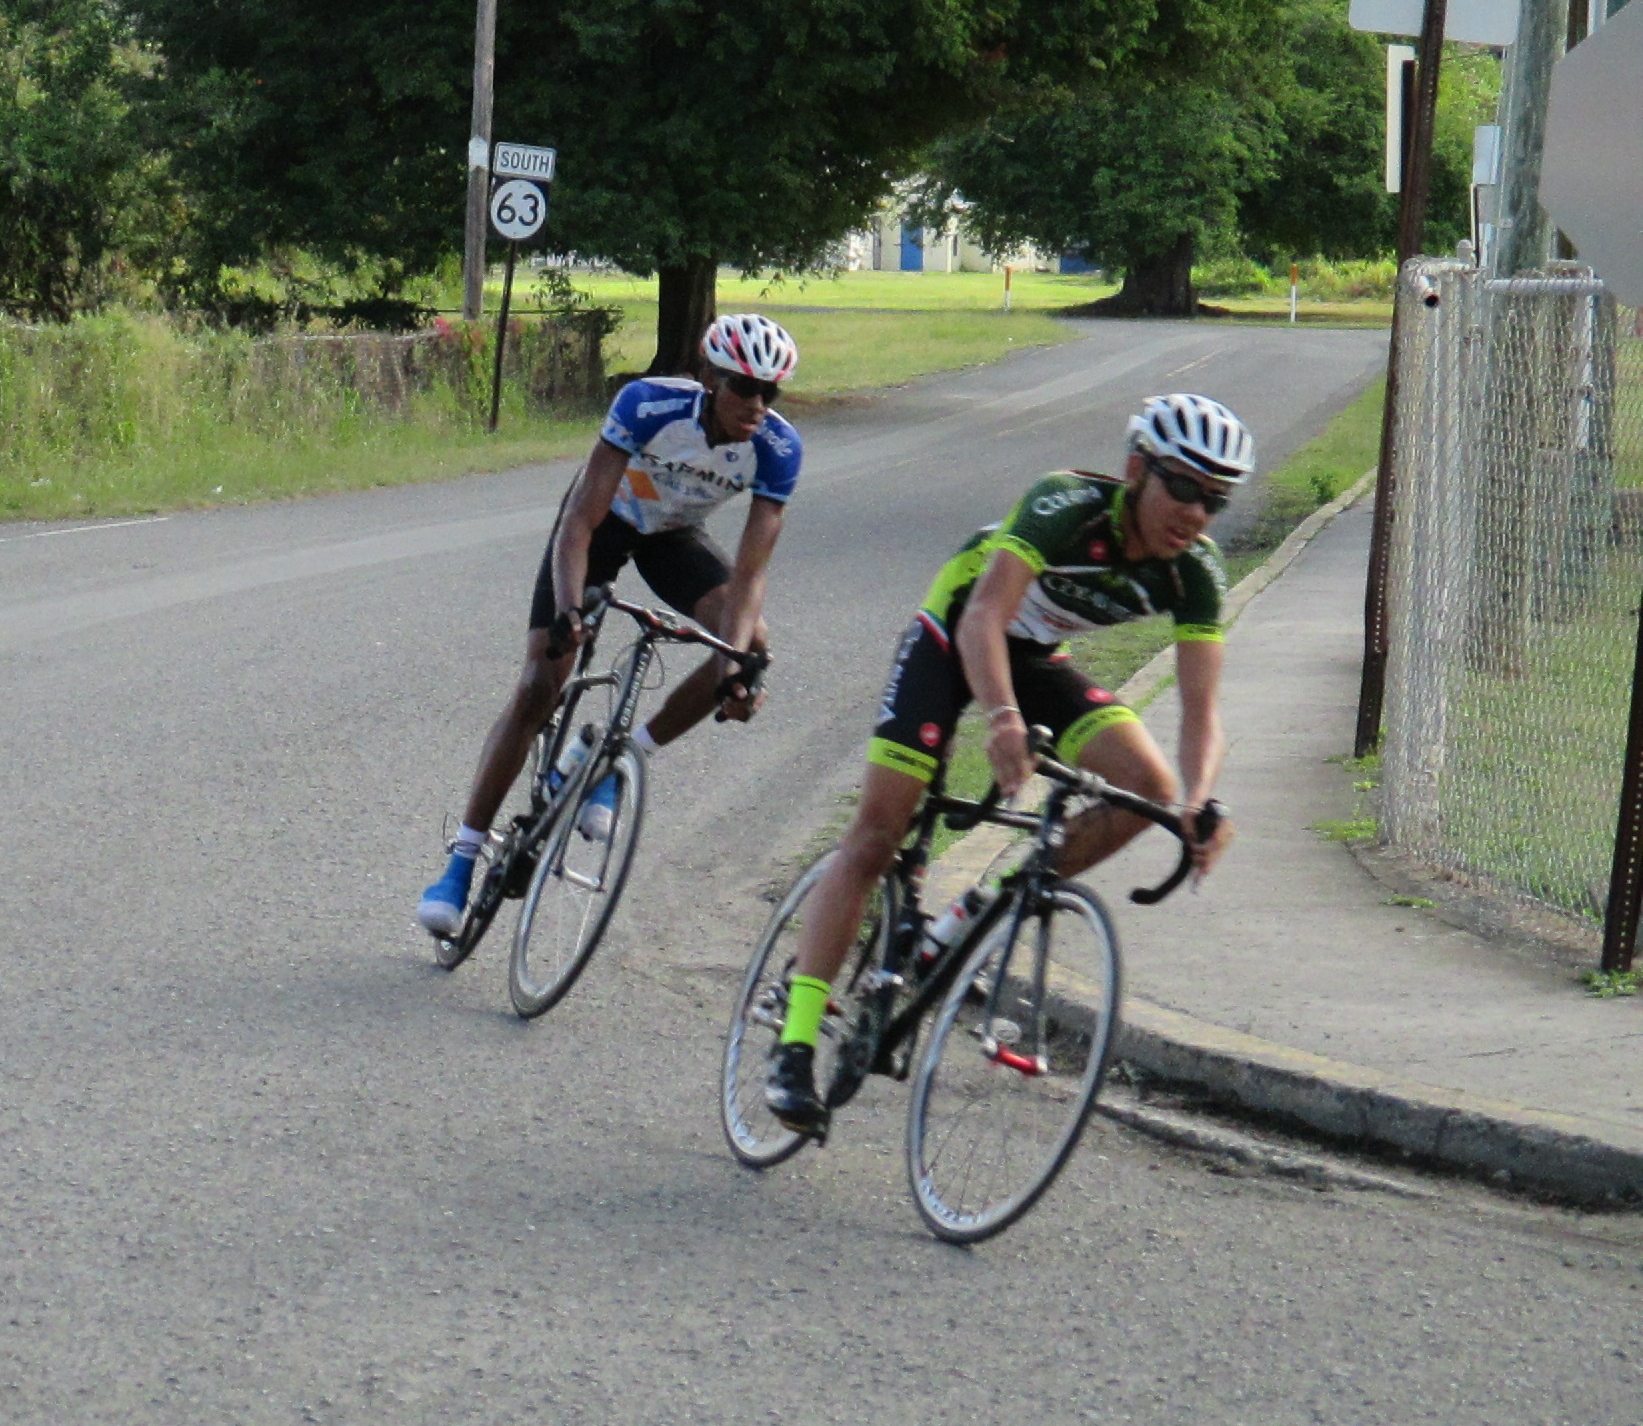 Race leaders in the Elite category:  Apolinar Acevedo Jr. is ahead (green) and Mark Defour is behind